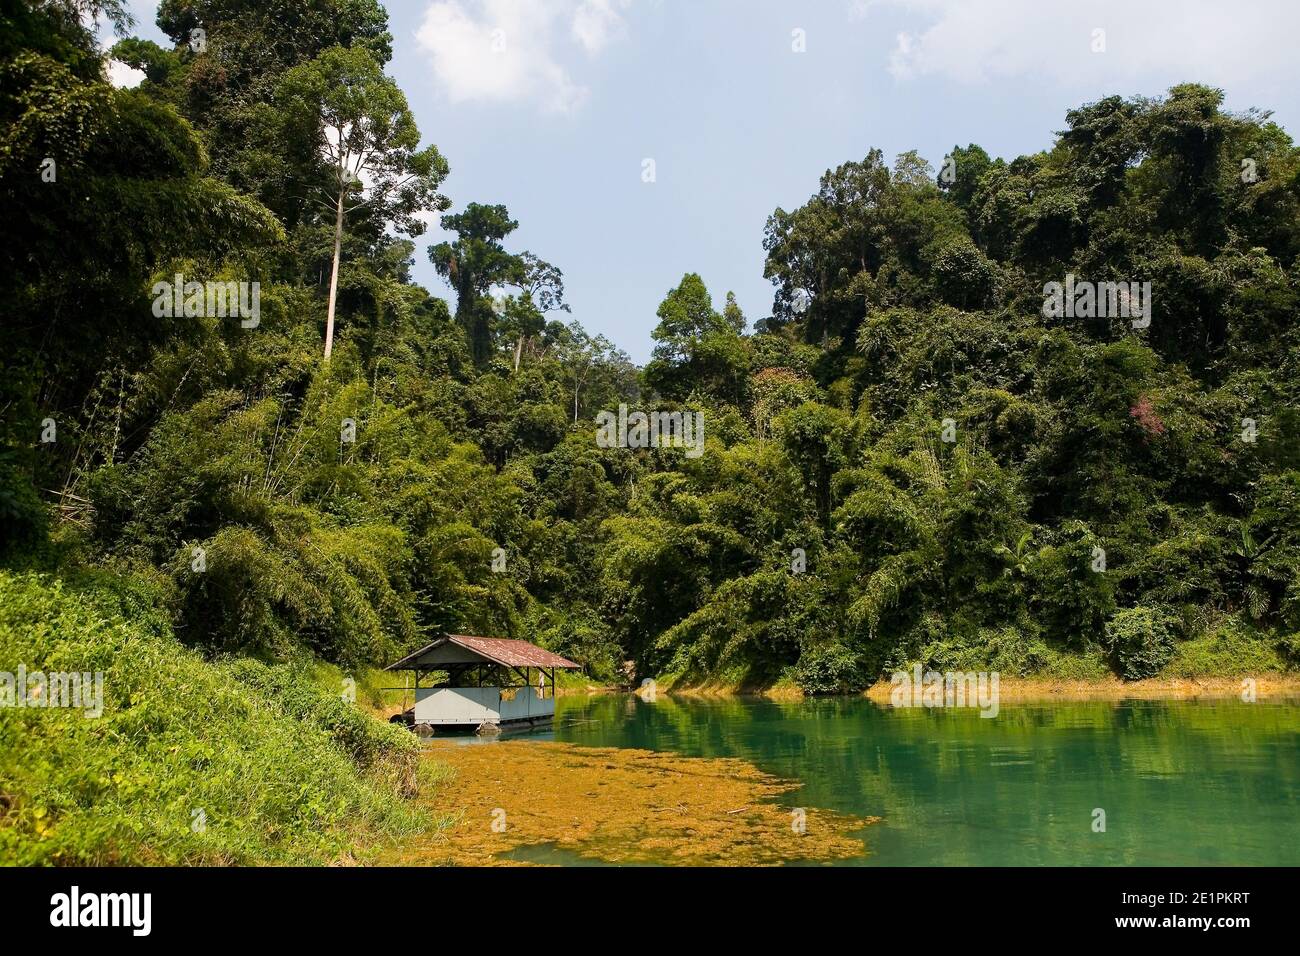 The shore of the picturesque Lake Cheow Lan and a small houseboat on the water. Thailand. Stock Photo